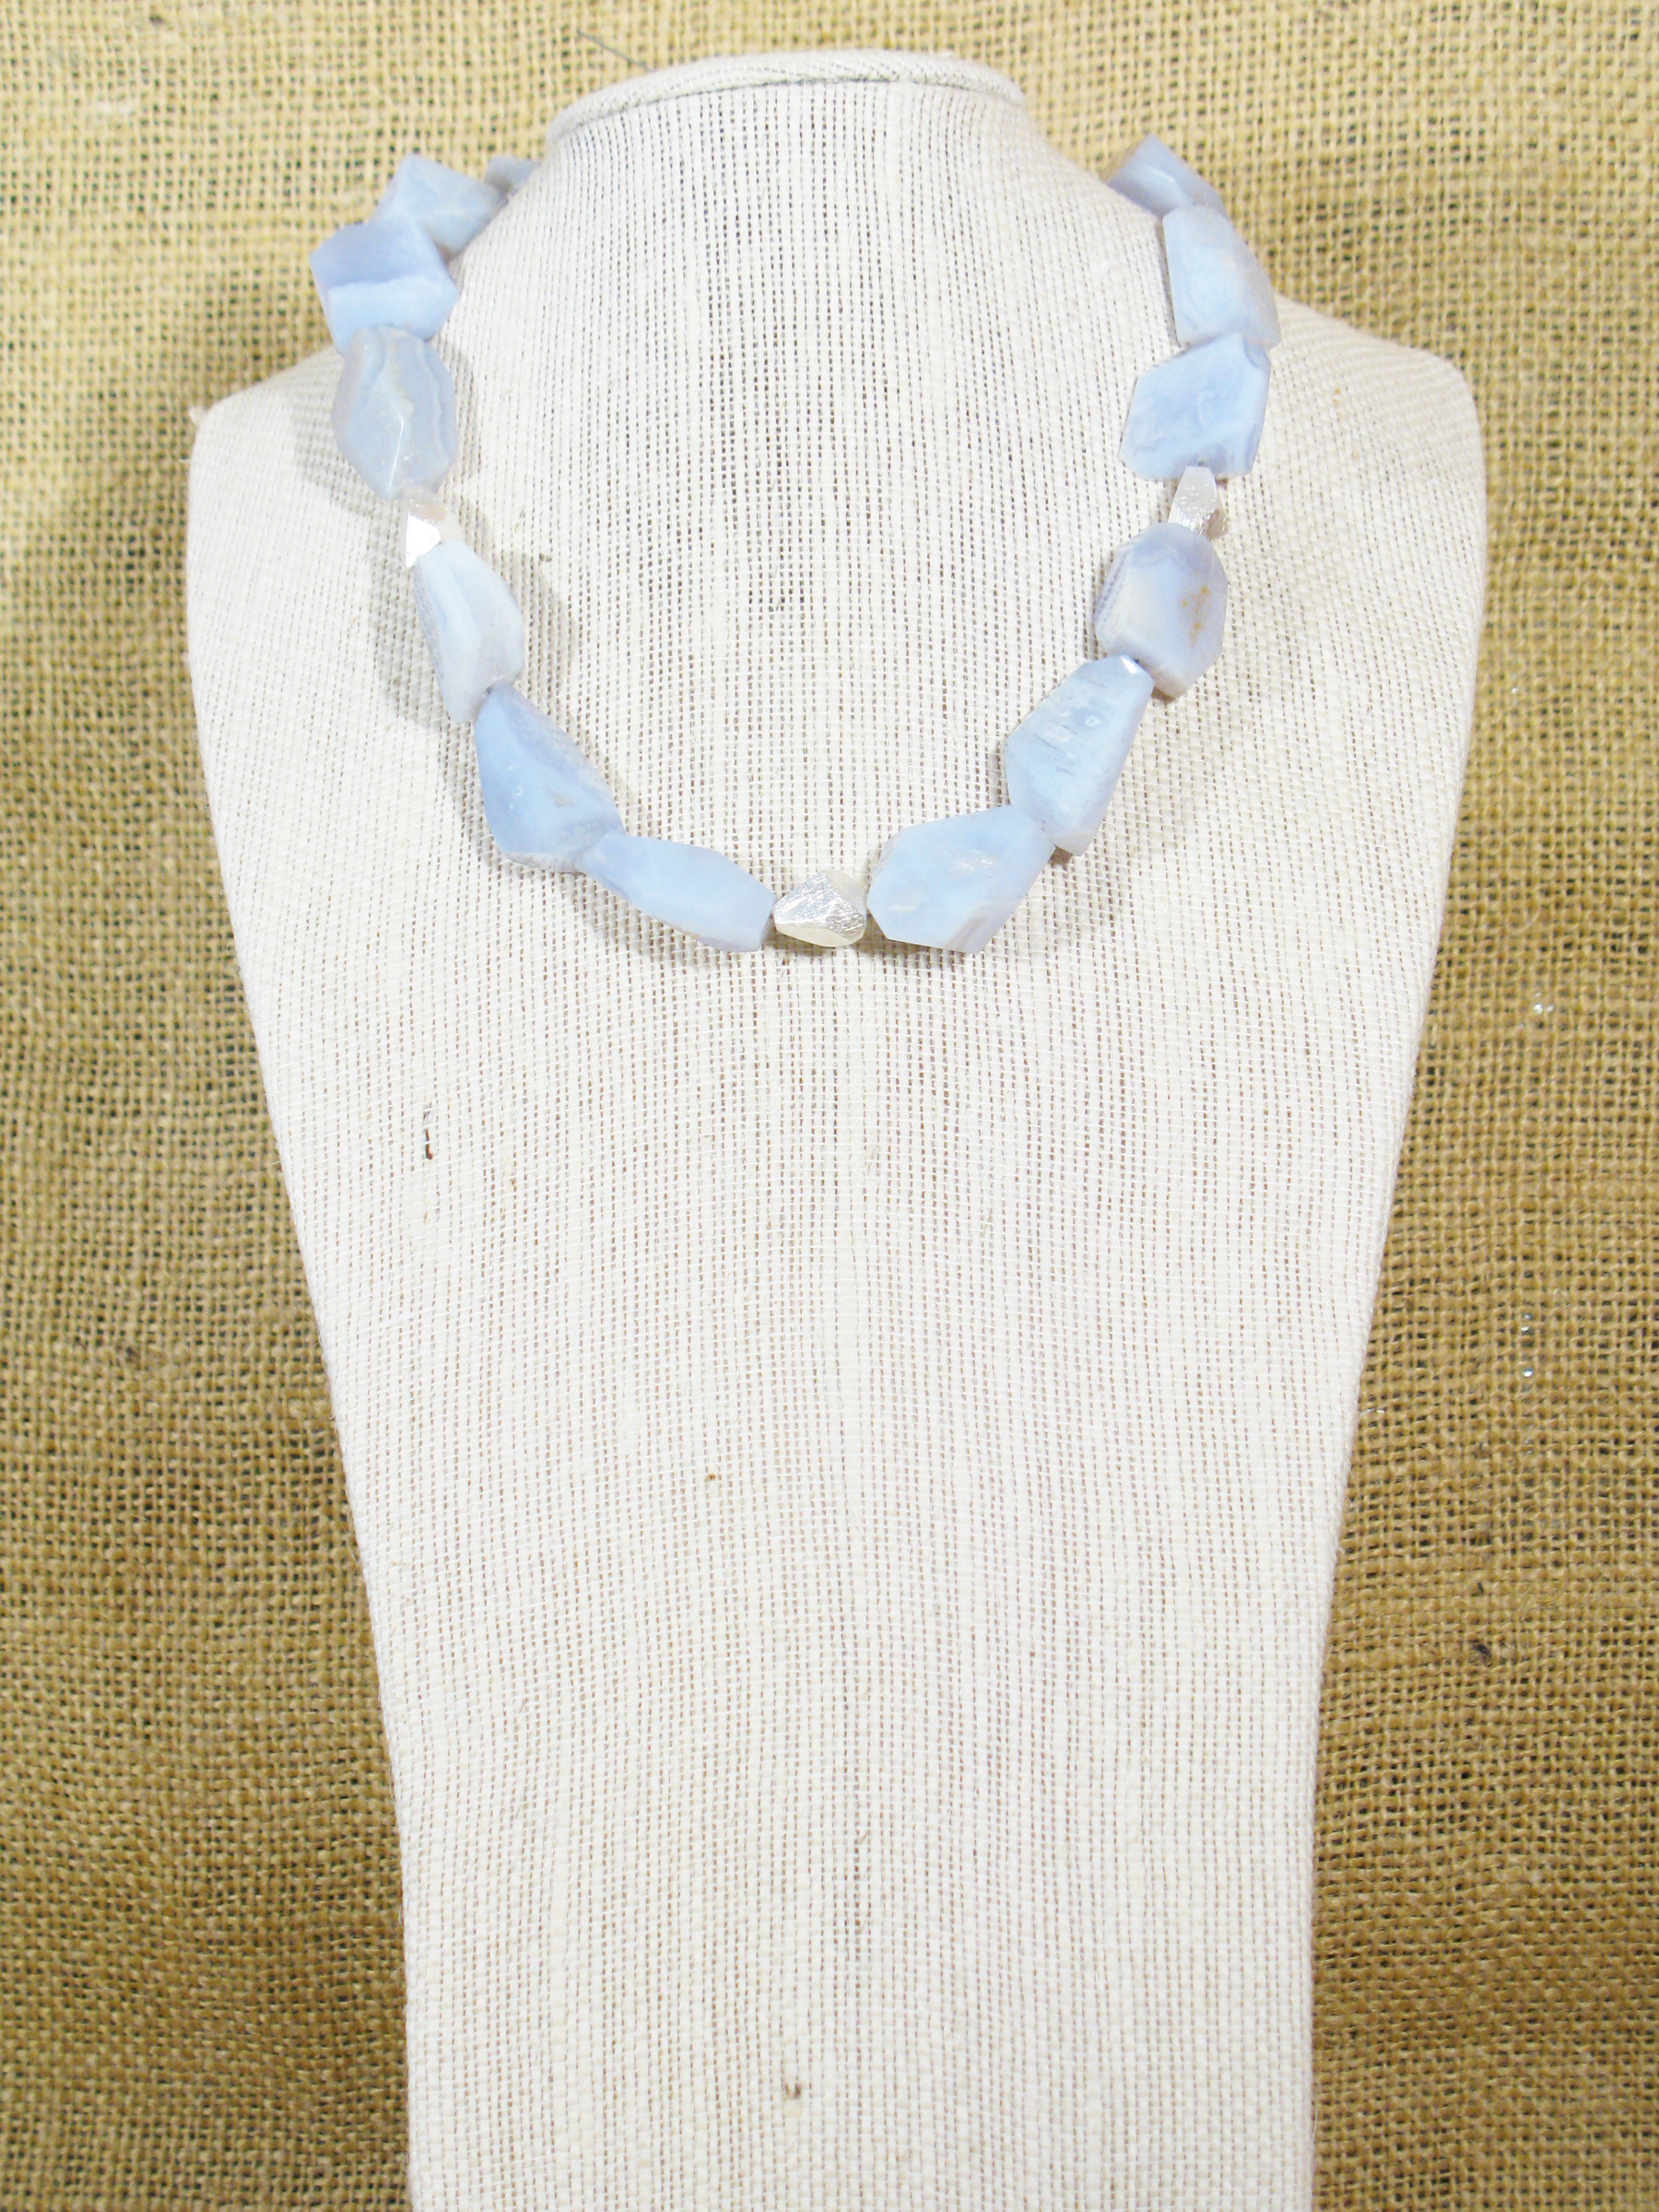 
BLUE CHALCEDONY & STERLING SILVER FACETED NUGGETS WITH STERLING CLASP